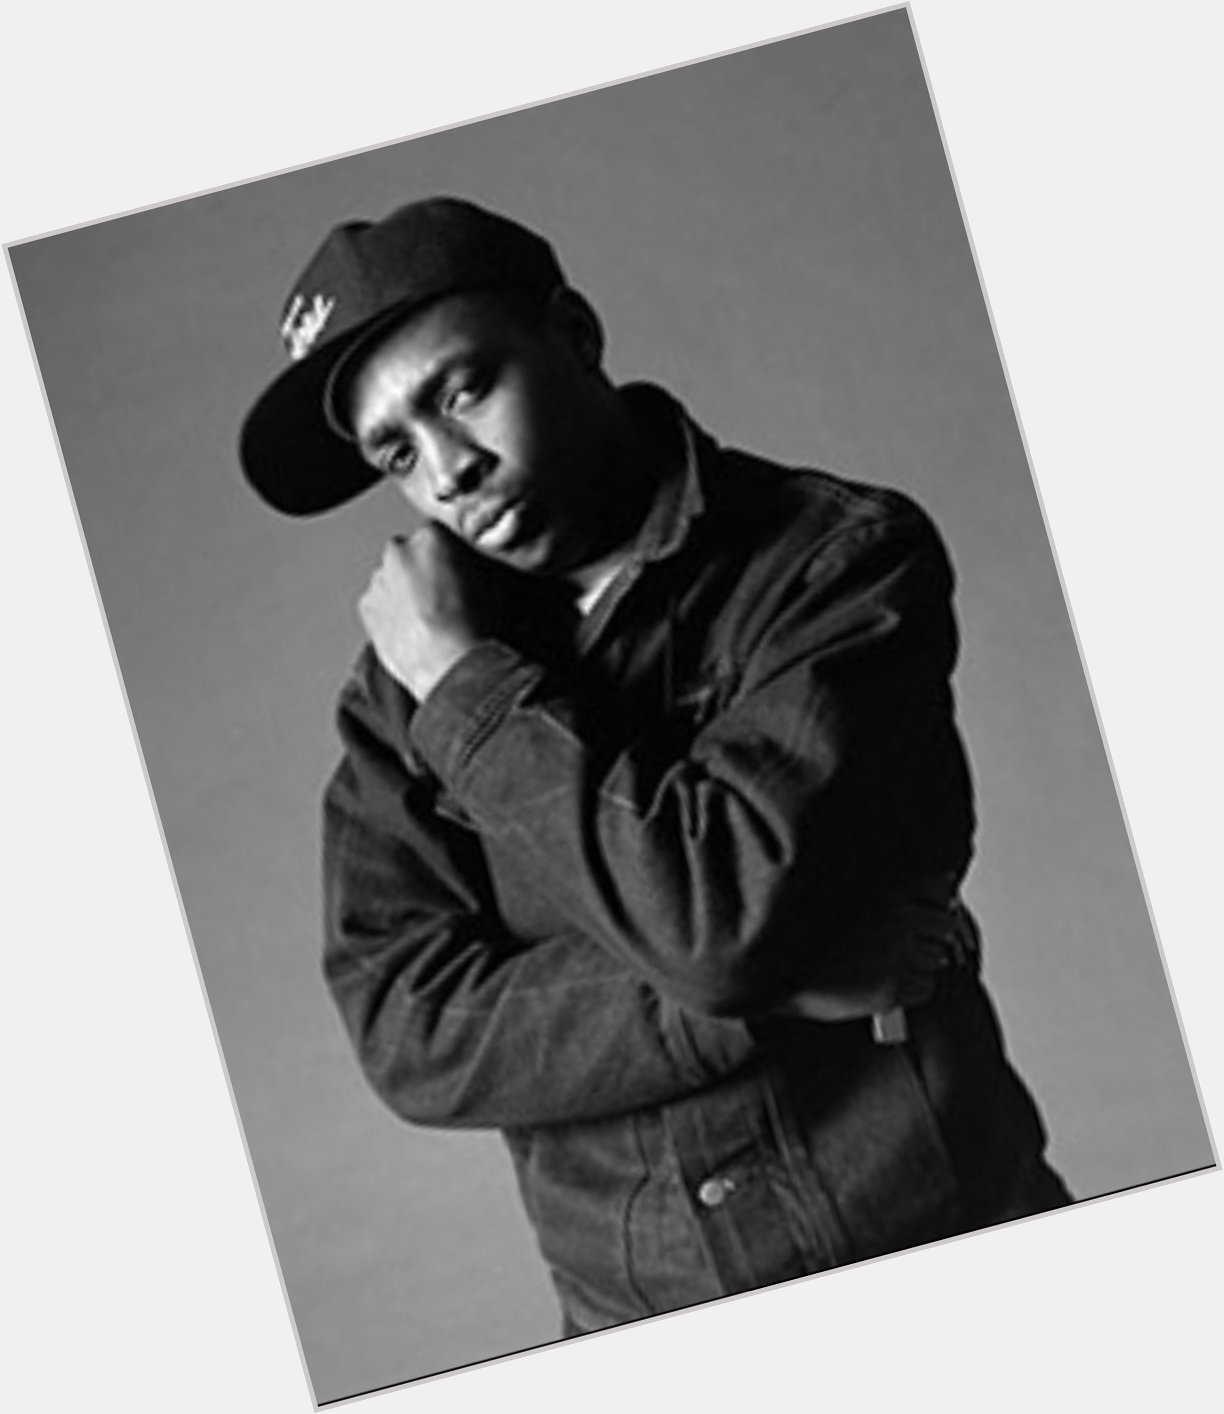 Happy birthday to the great Chuck D 